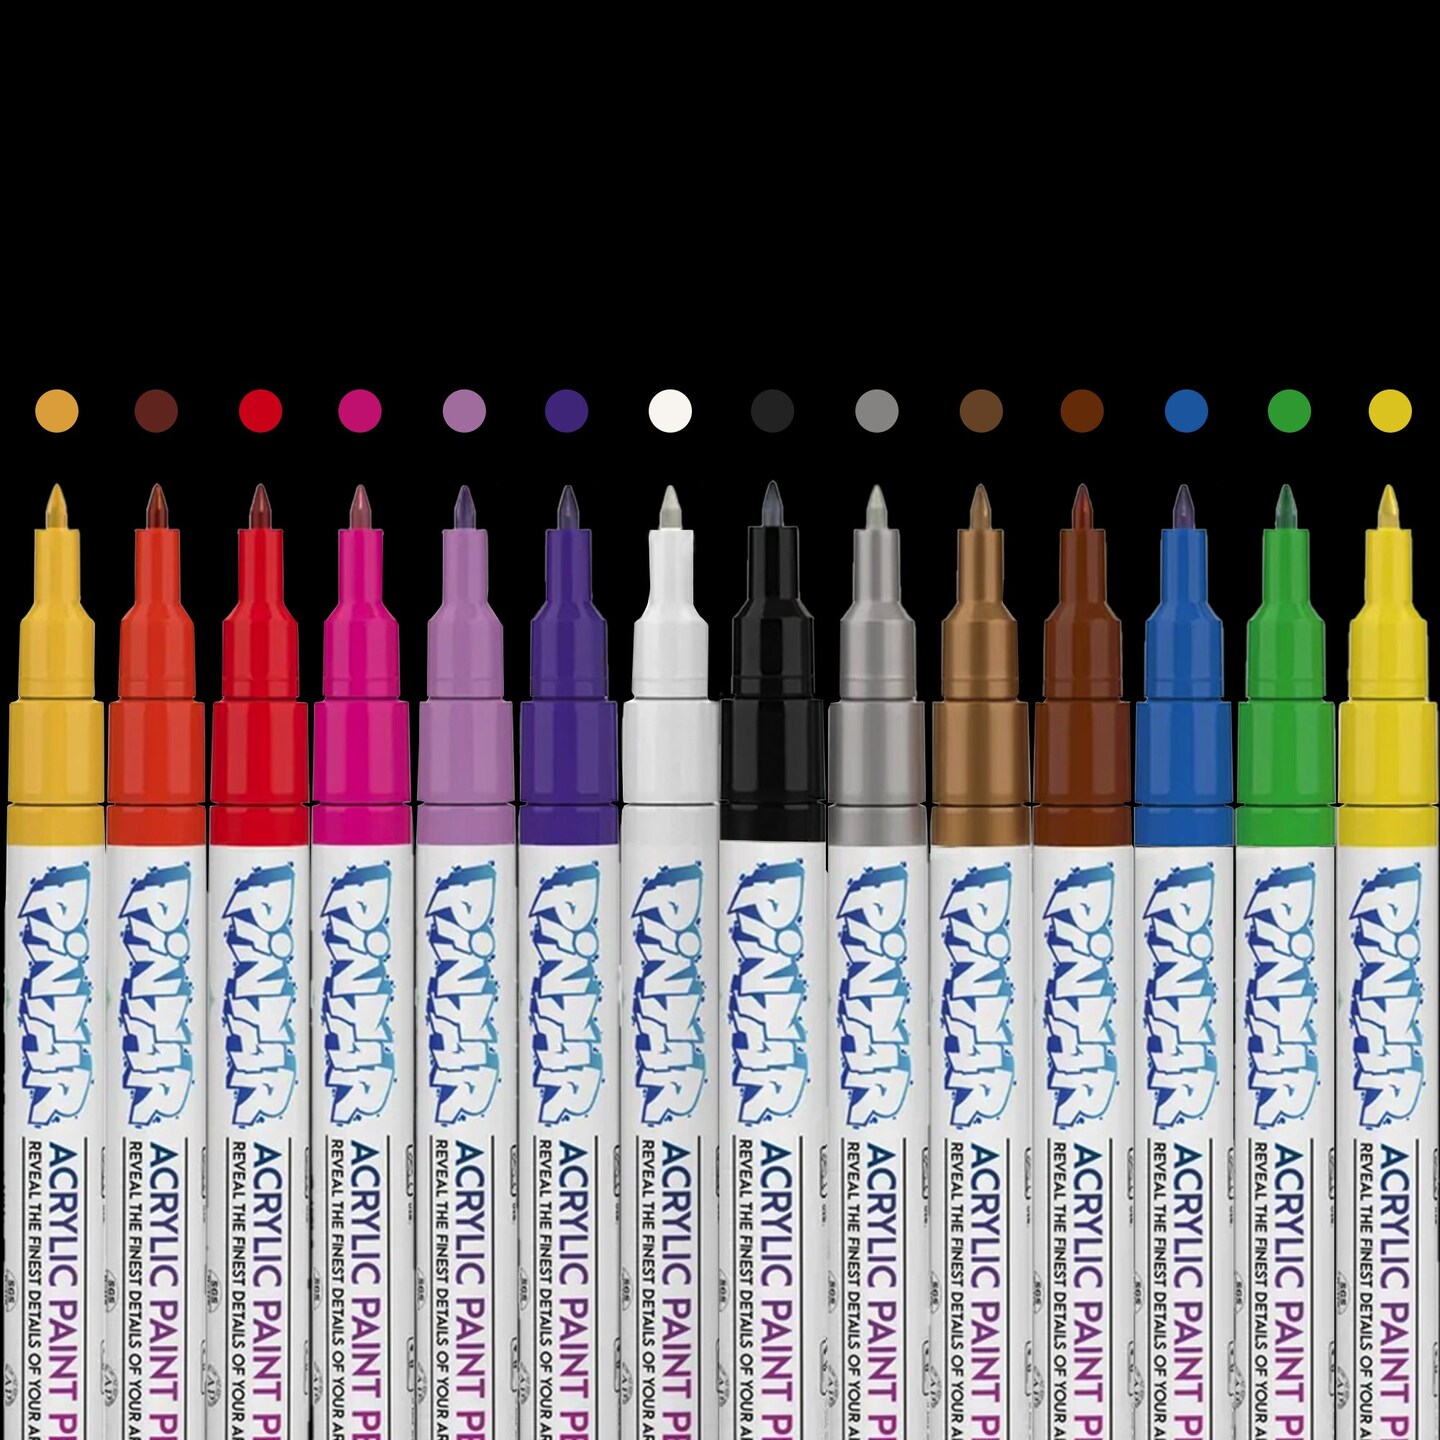 PINTAR Acrylic Paint Markers Set - Extra Fine Tip Paint Pens - Acrylic Markers Paint Pens - Acrylic Paint Pens for Rock Painting, Wood, Glass, Leather, Shoes - Pack of 14, 0.7 mm